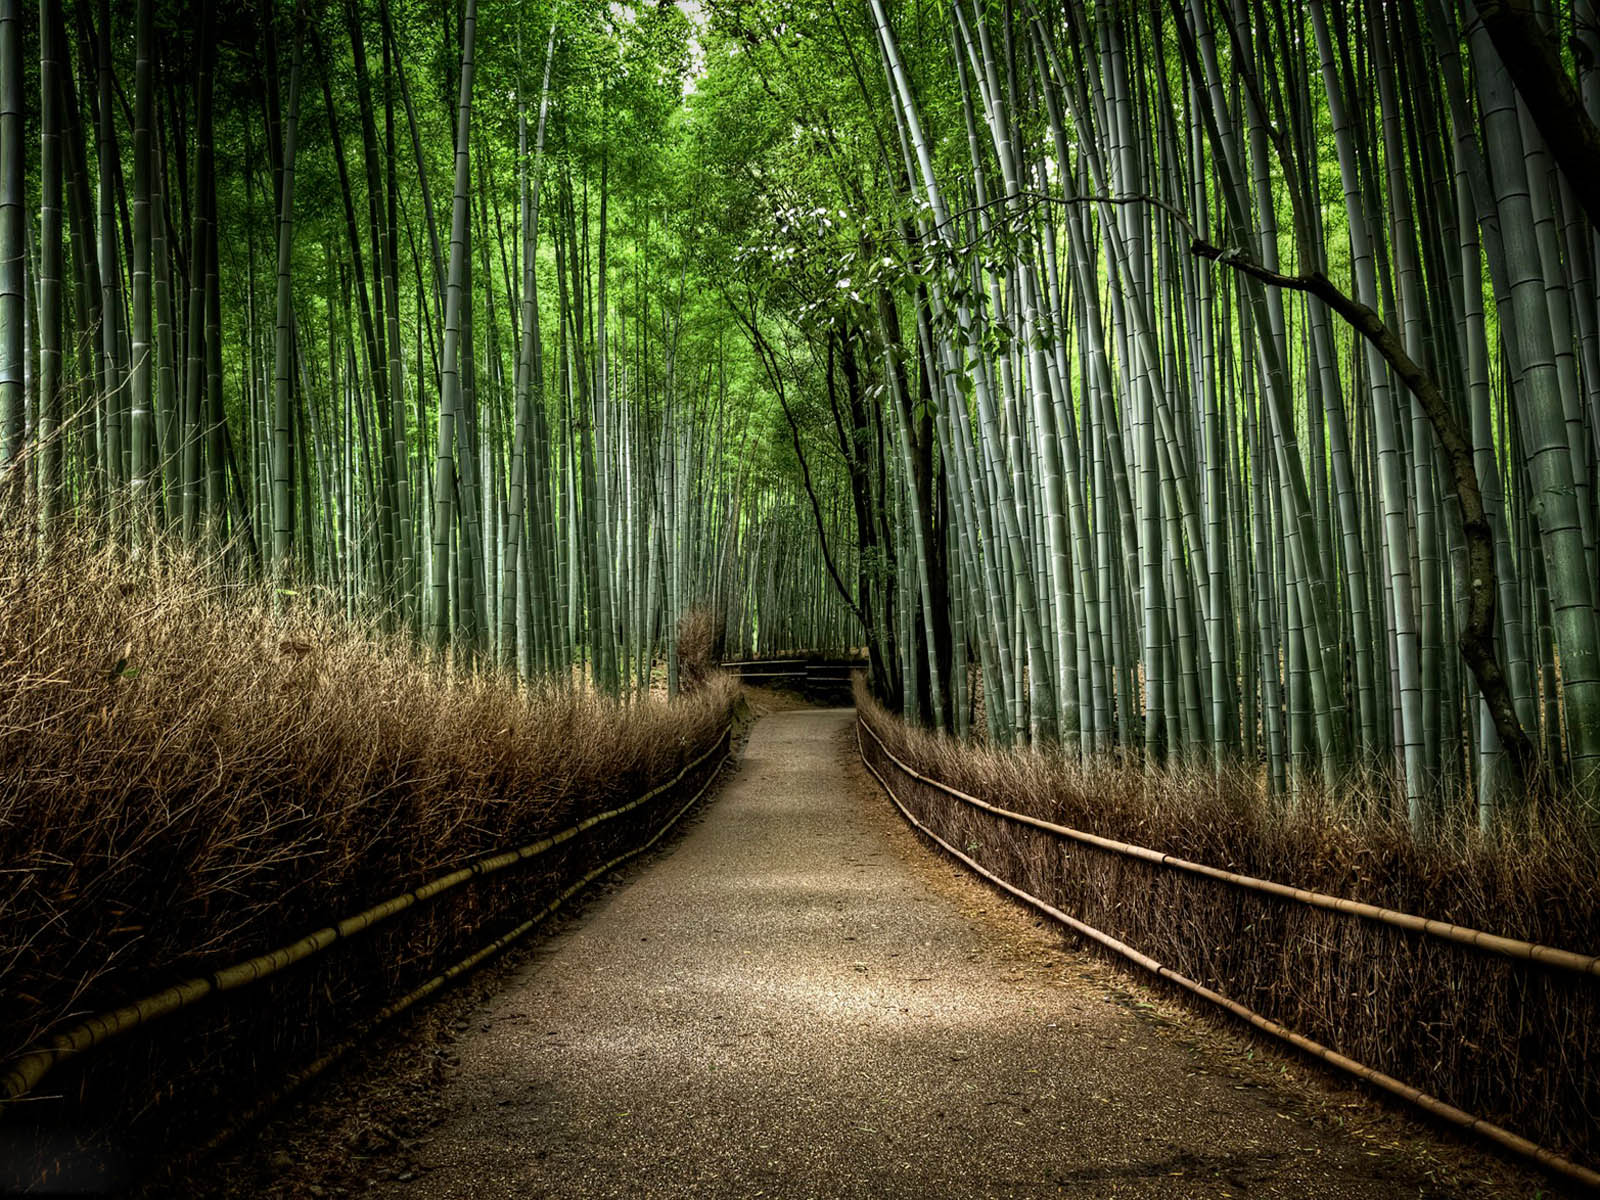 Free download Bamboo Forest Wallpaper Image Photo Picture and Background [1600x1200] for your Desktop, Mobile & Tablet. Explore Bamboo Forest Japan Computer Wallpaper. Bamboo Wallpaper Wall Coverings, Bamboo Forest